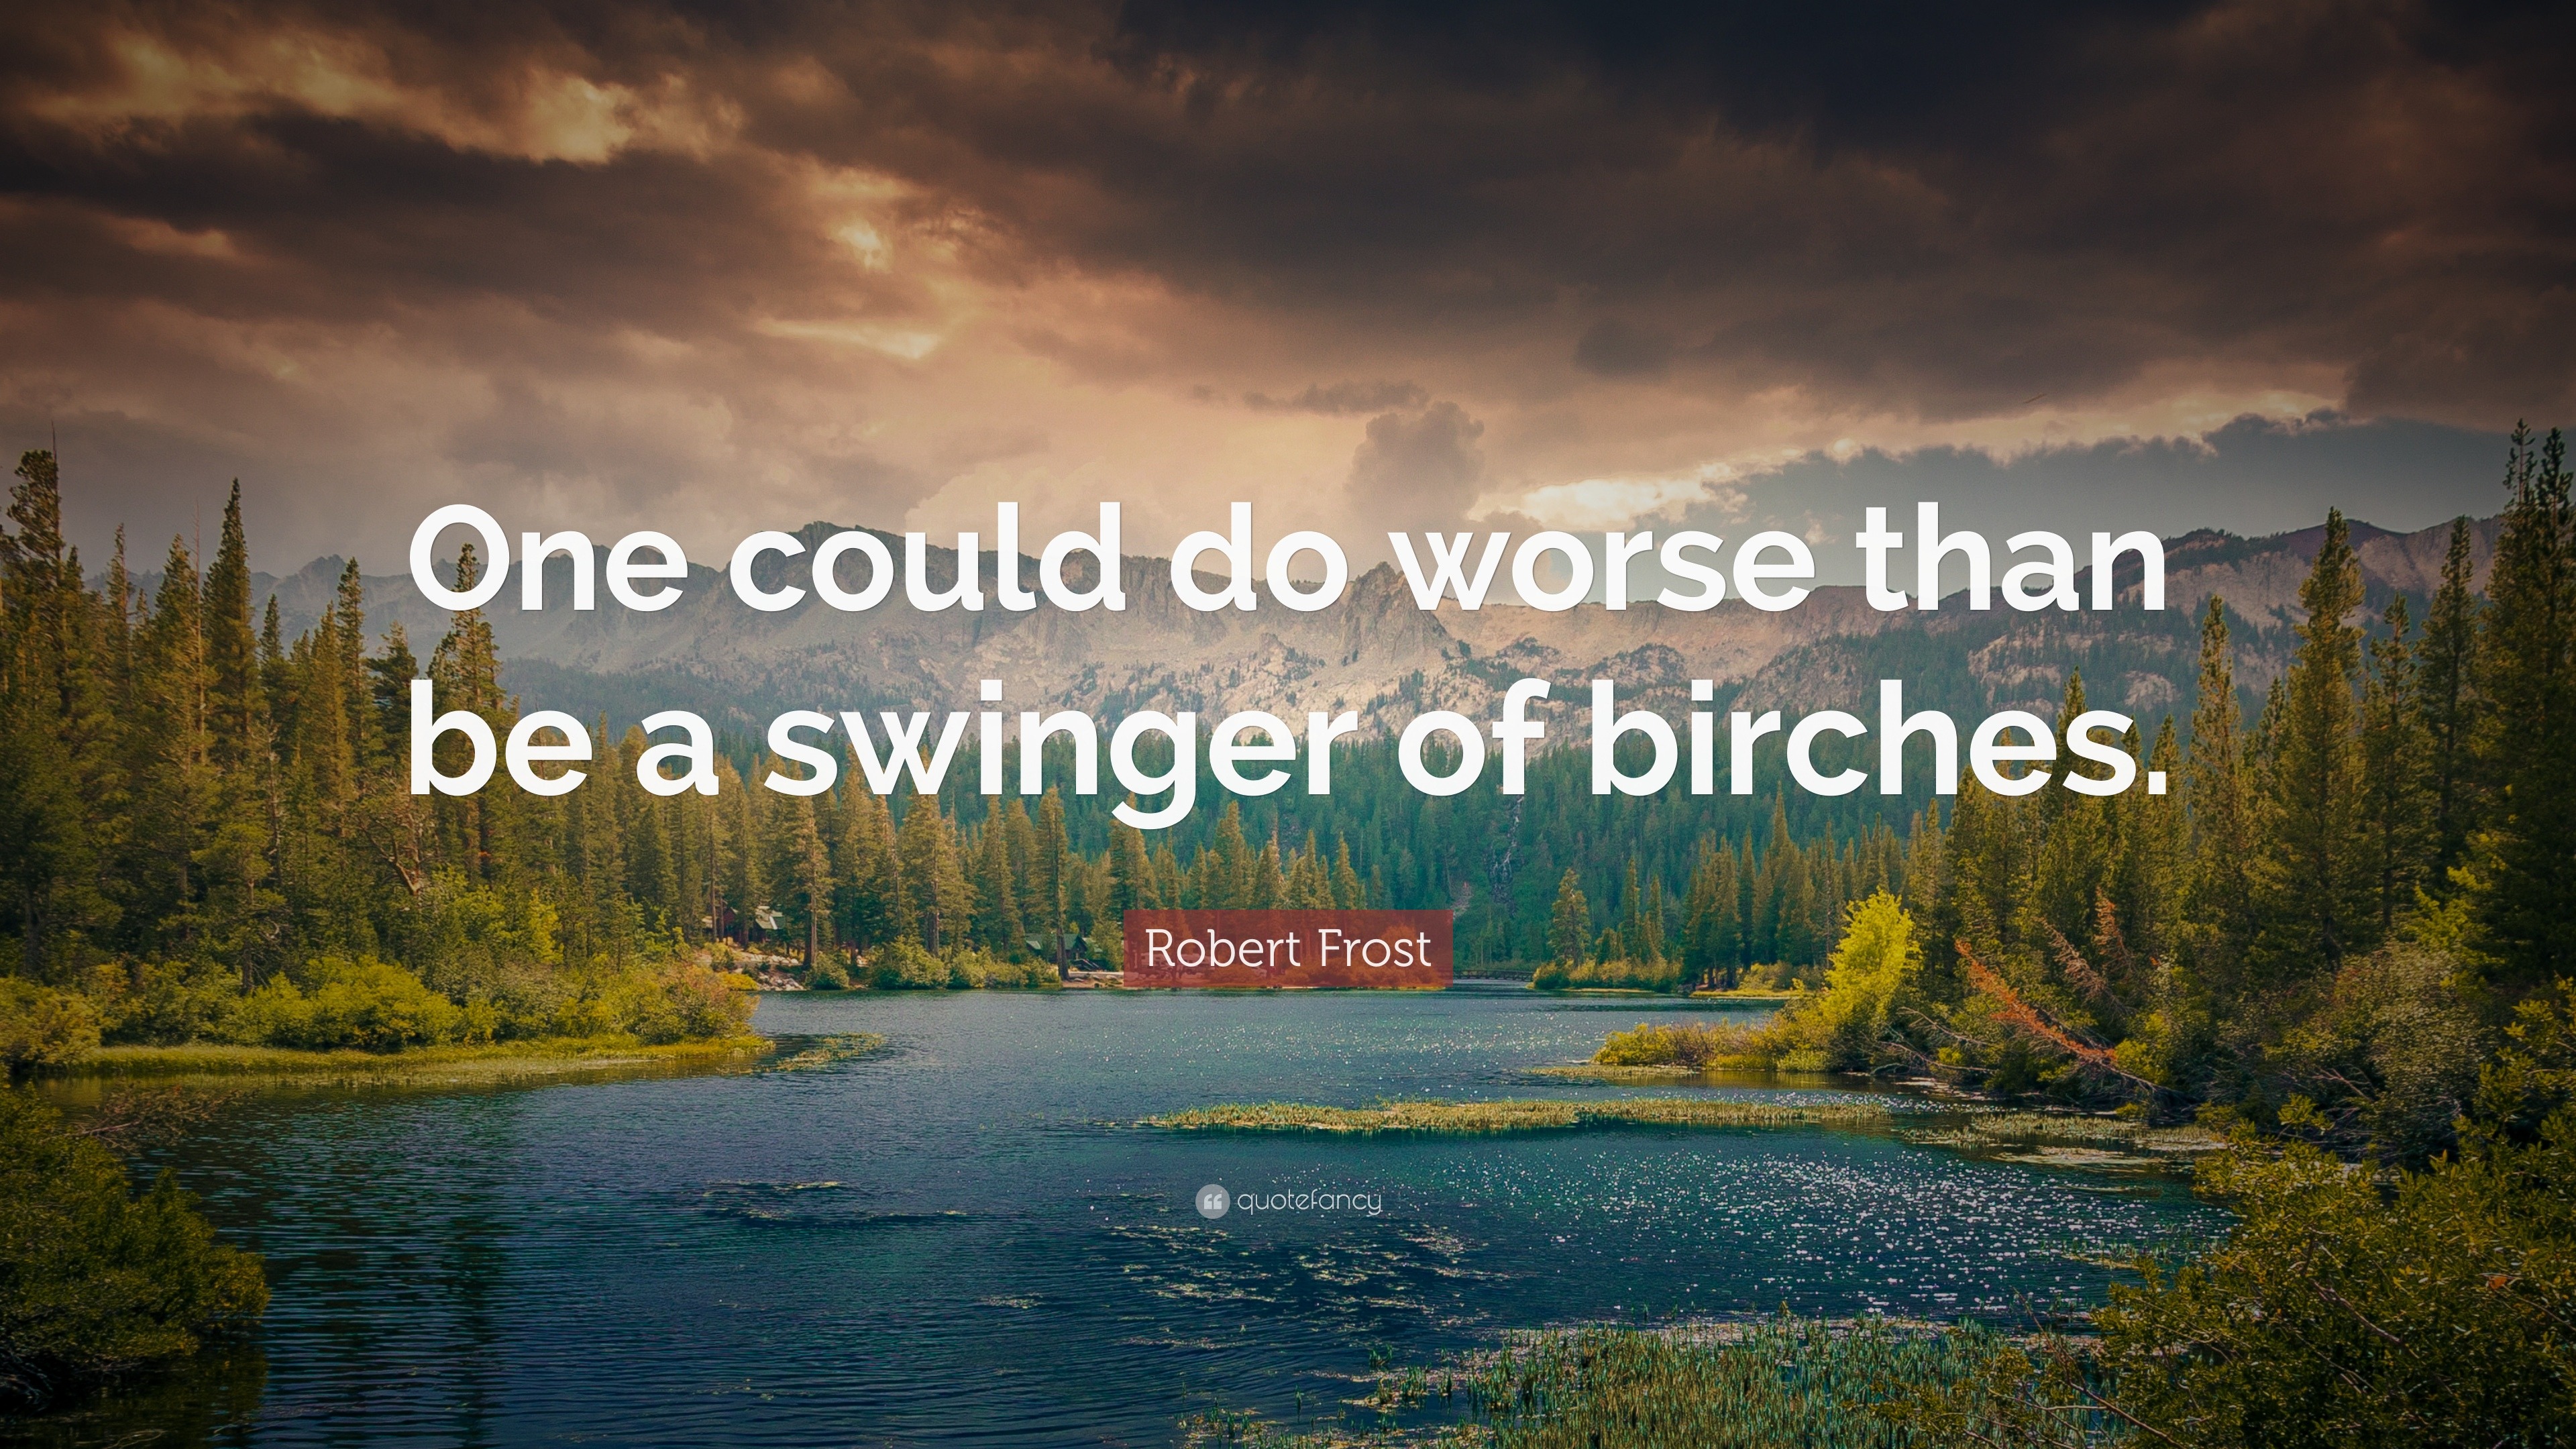 Robert Frost Quote “One could do worse